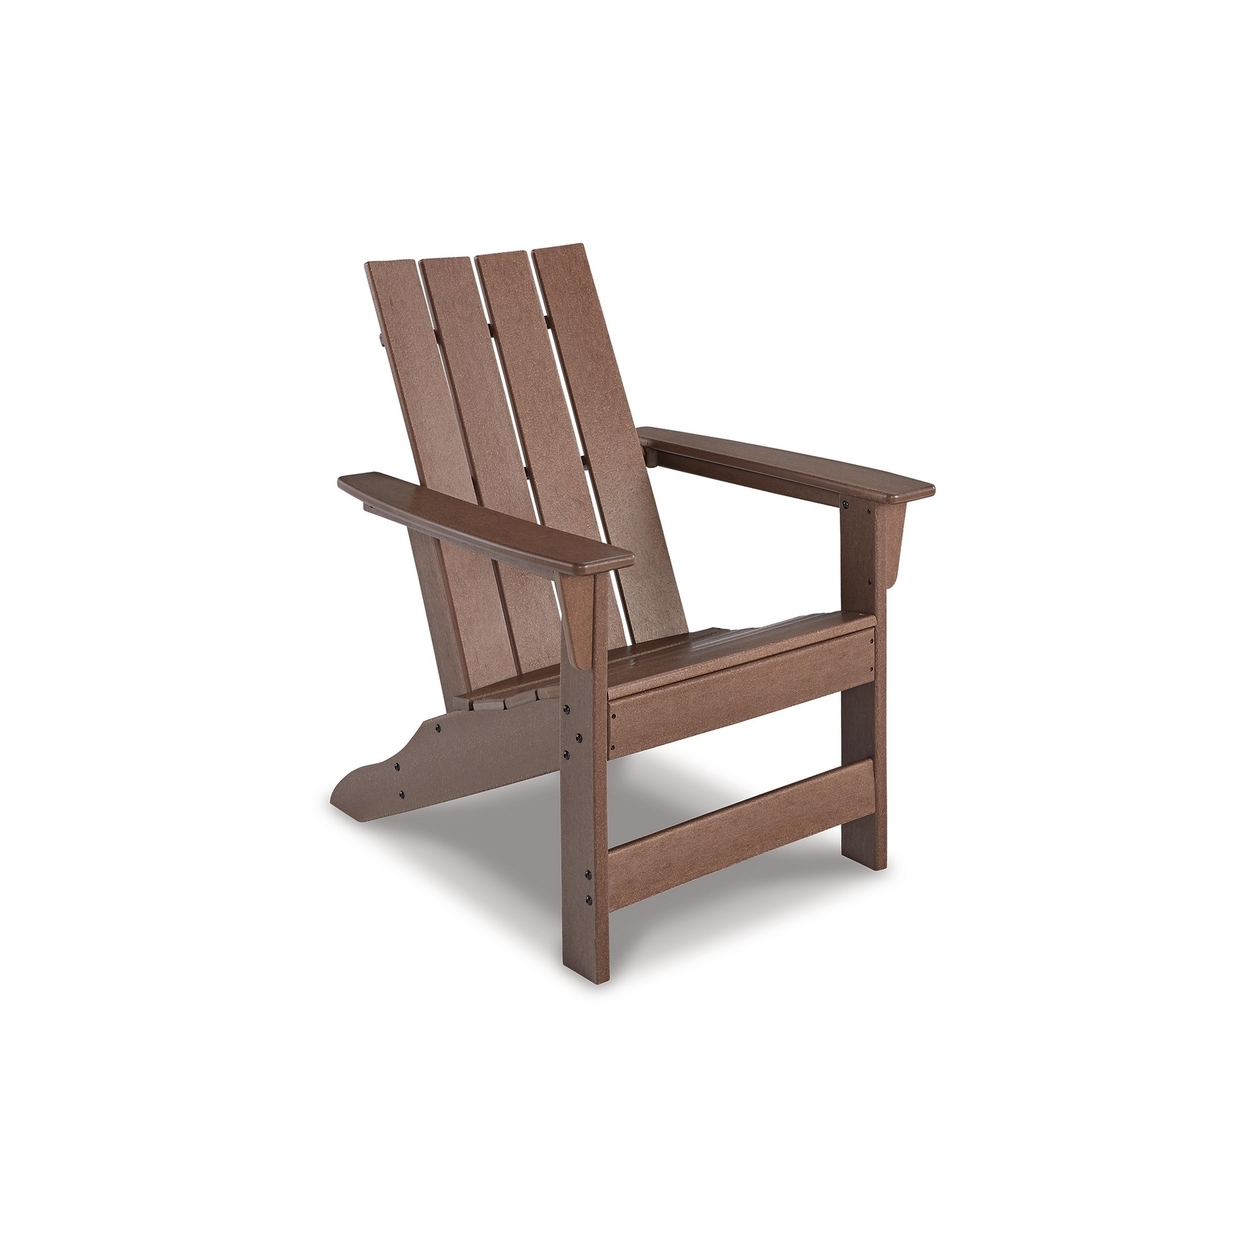 Emme 31 Inch Outdoor Adirondack Chair, Slatted Design And Brown Frame - Saltoro Sherpi